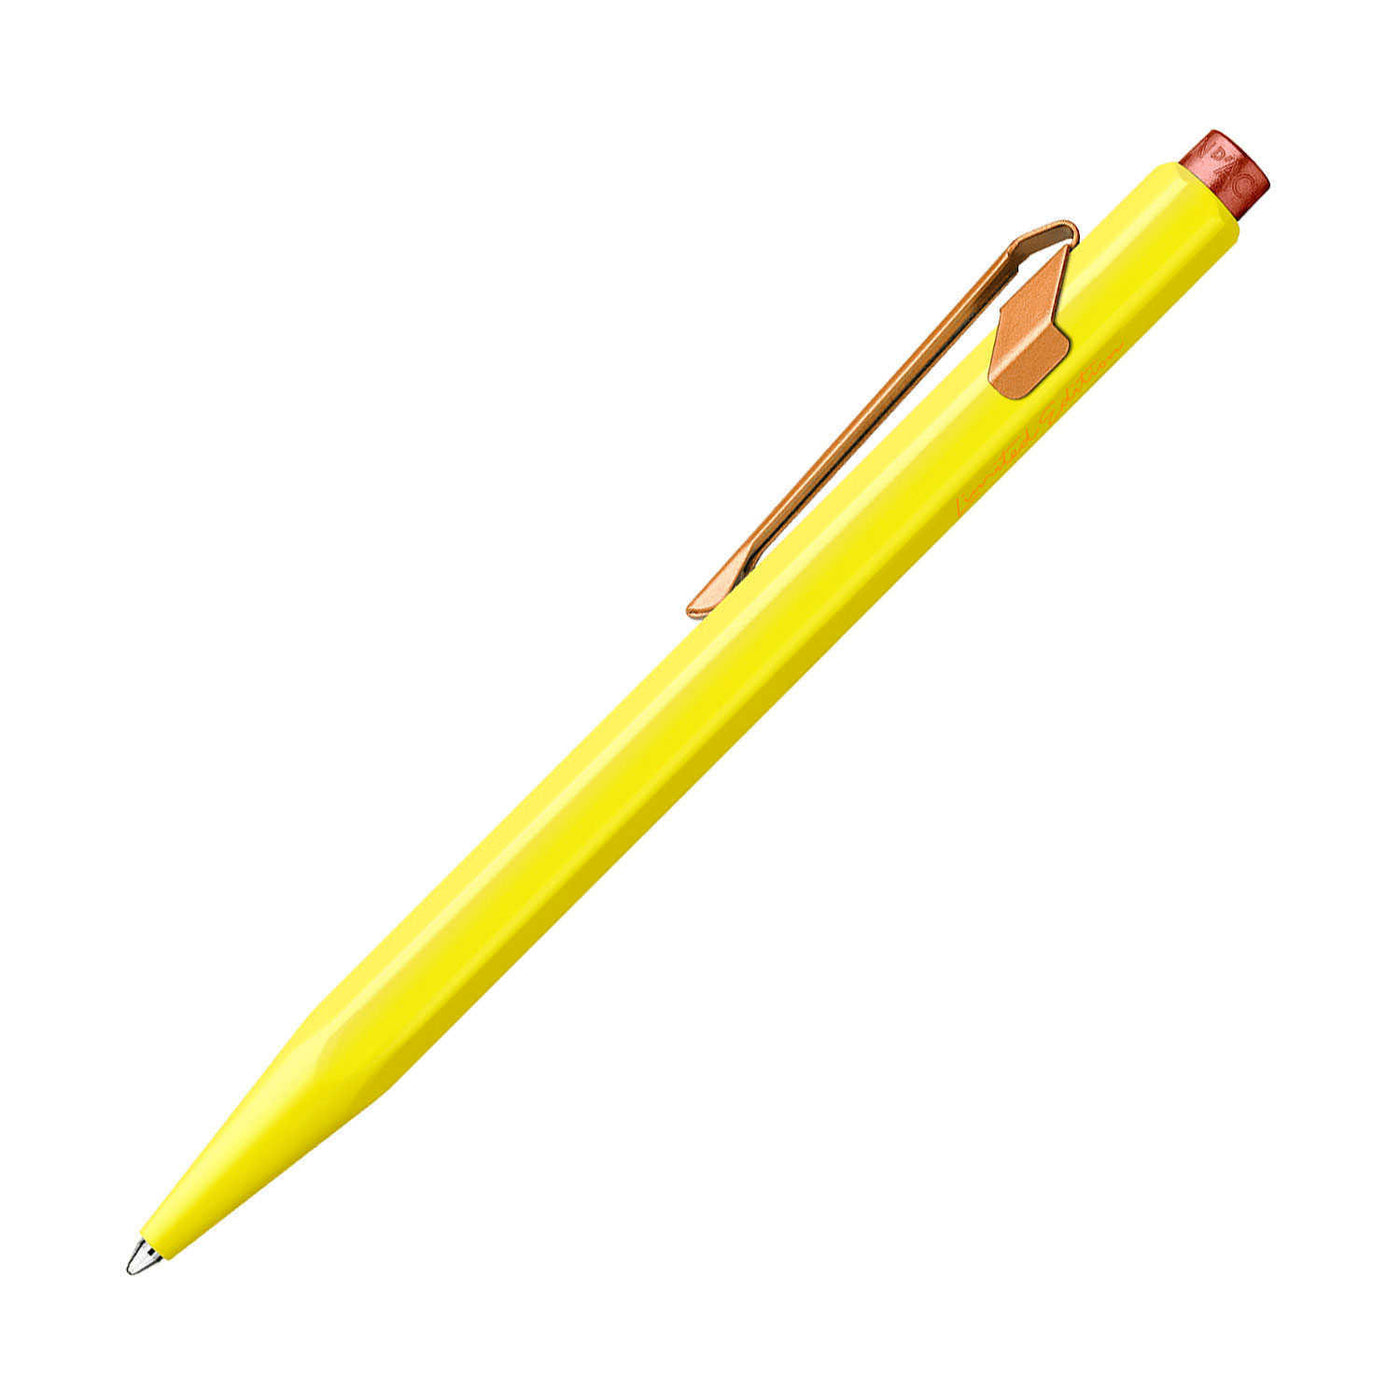 Caran d'Ache 849 Claim Your Style Ball Pen - Canary Yellow (Limited Edition) 3